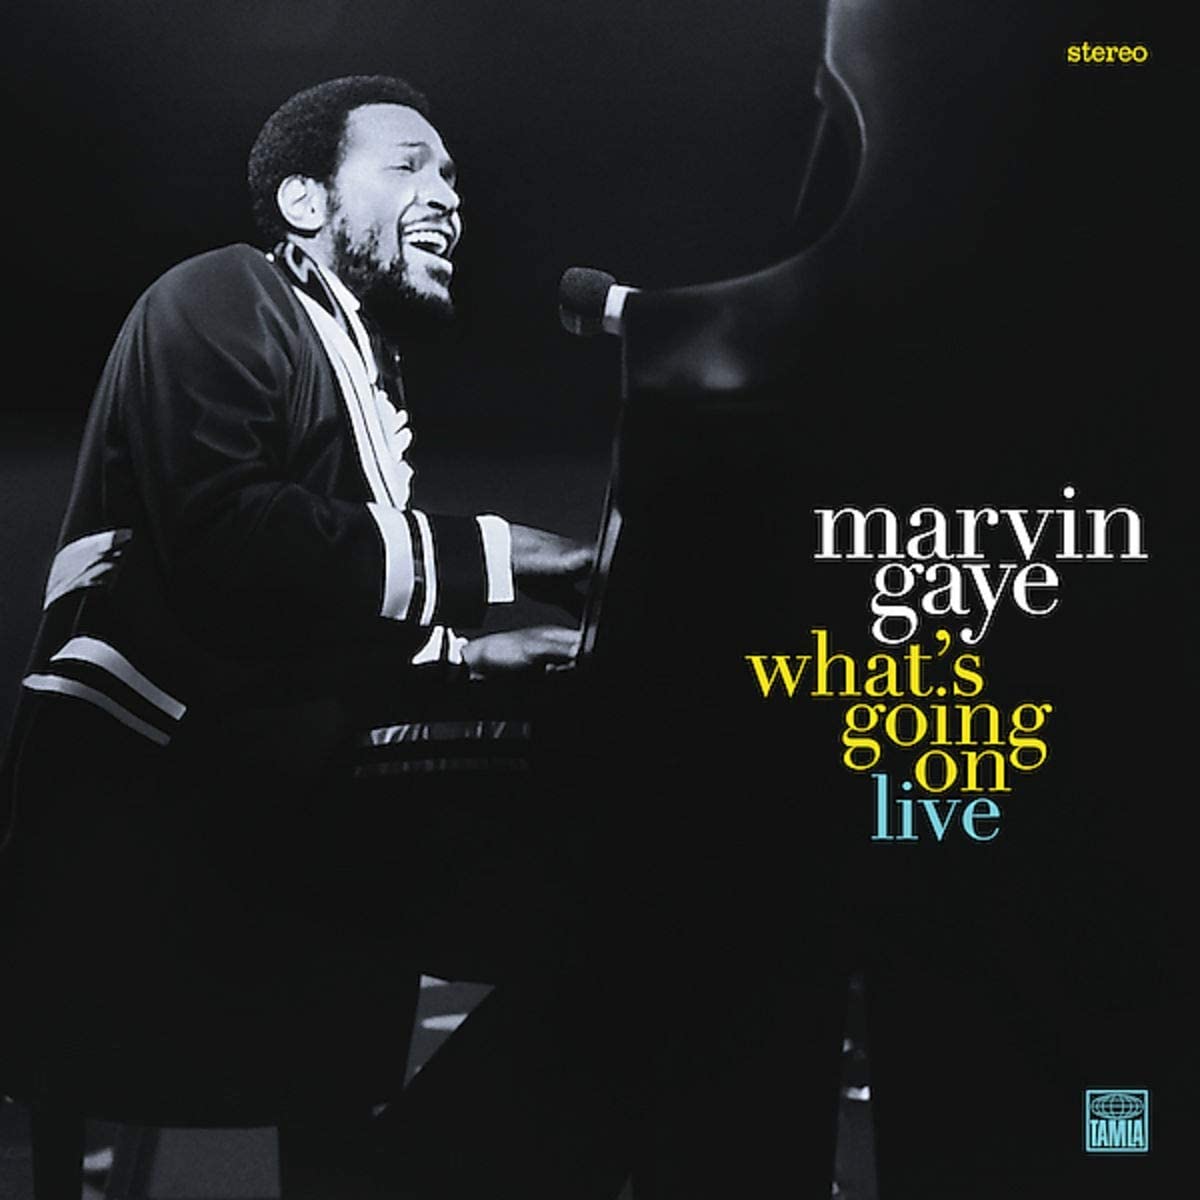 Marvin Gaye - What's Goin' On Live - CD